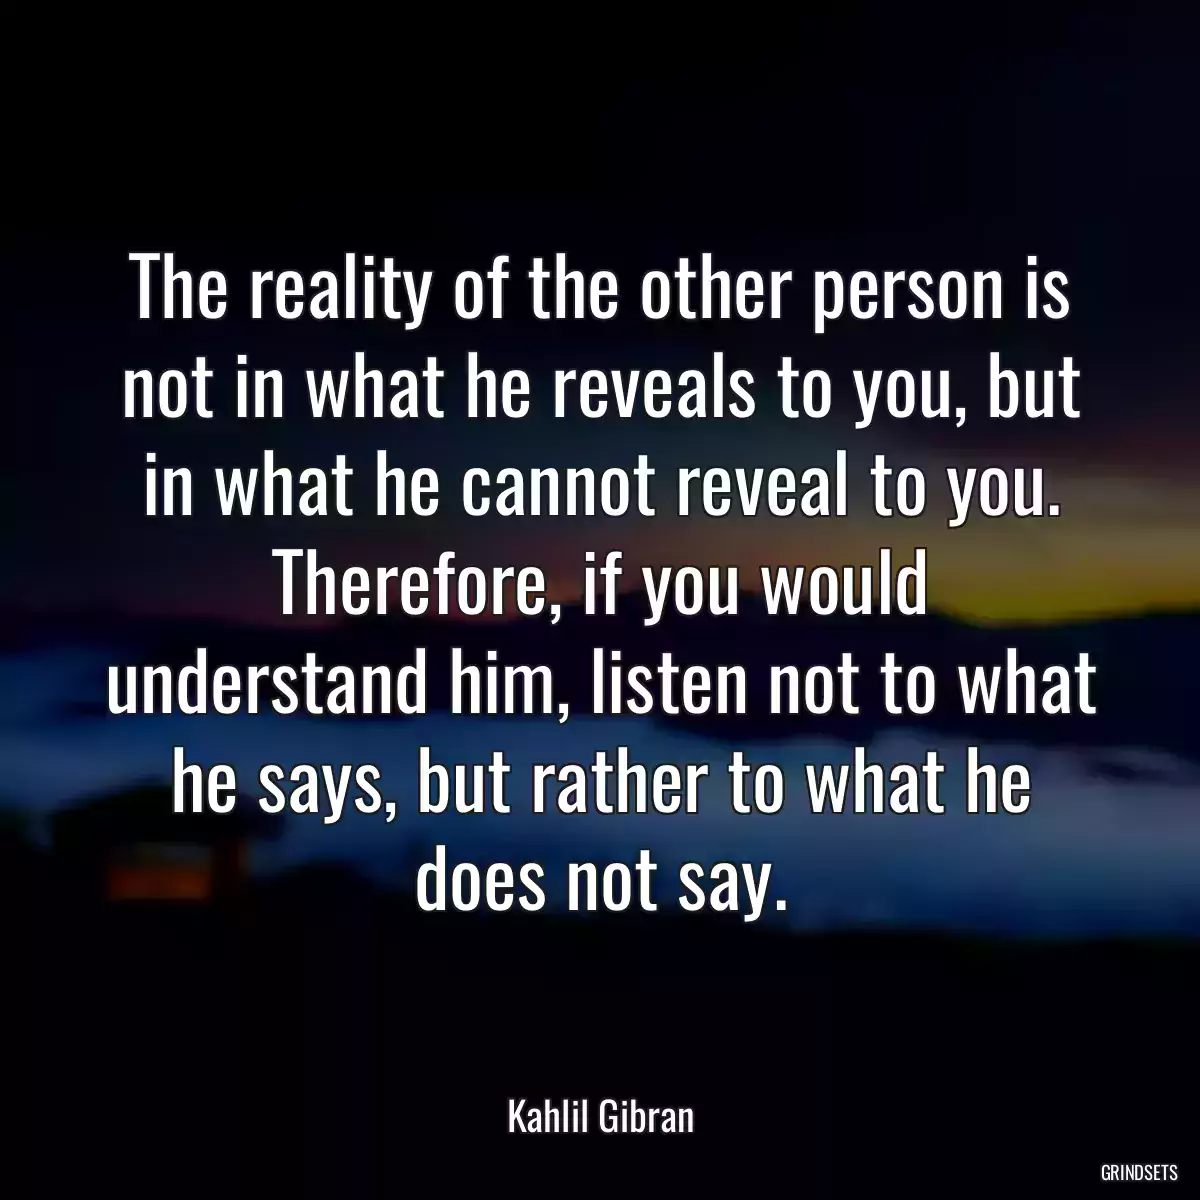 The reality of the other person is not in what he reveals to you, but in what he cannot reveal to you. Therefore, if you would understand him, listen not to what he says, but rather to what he does not say.